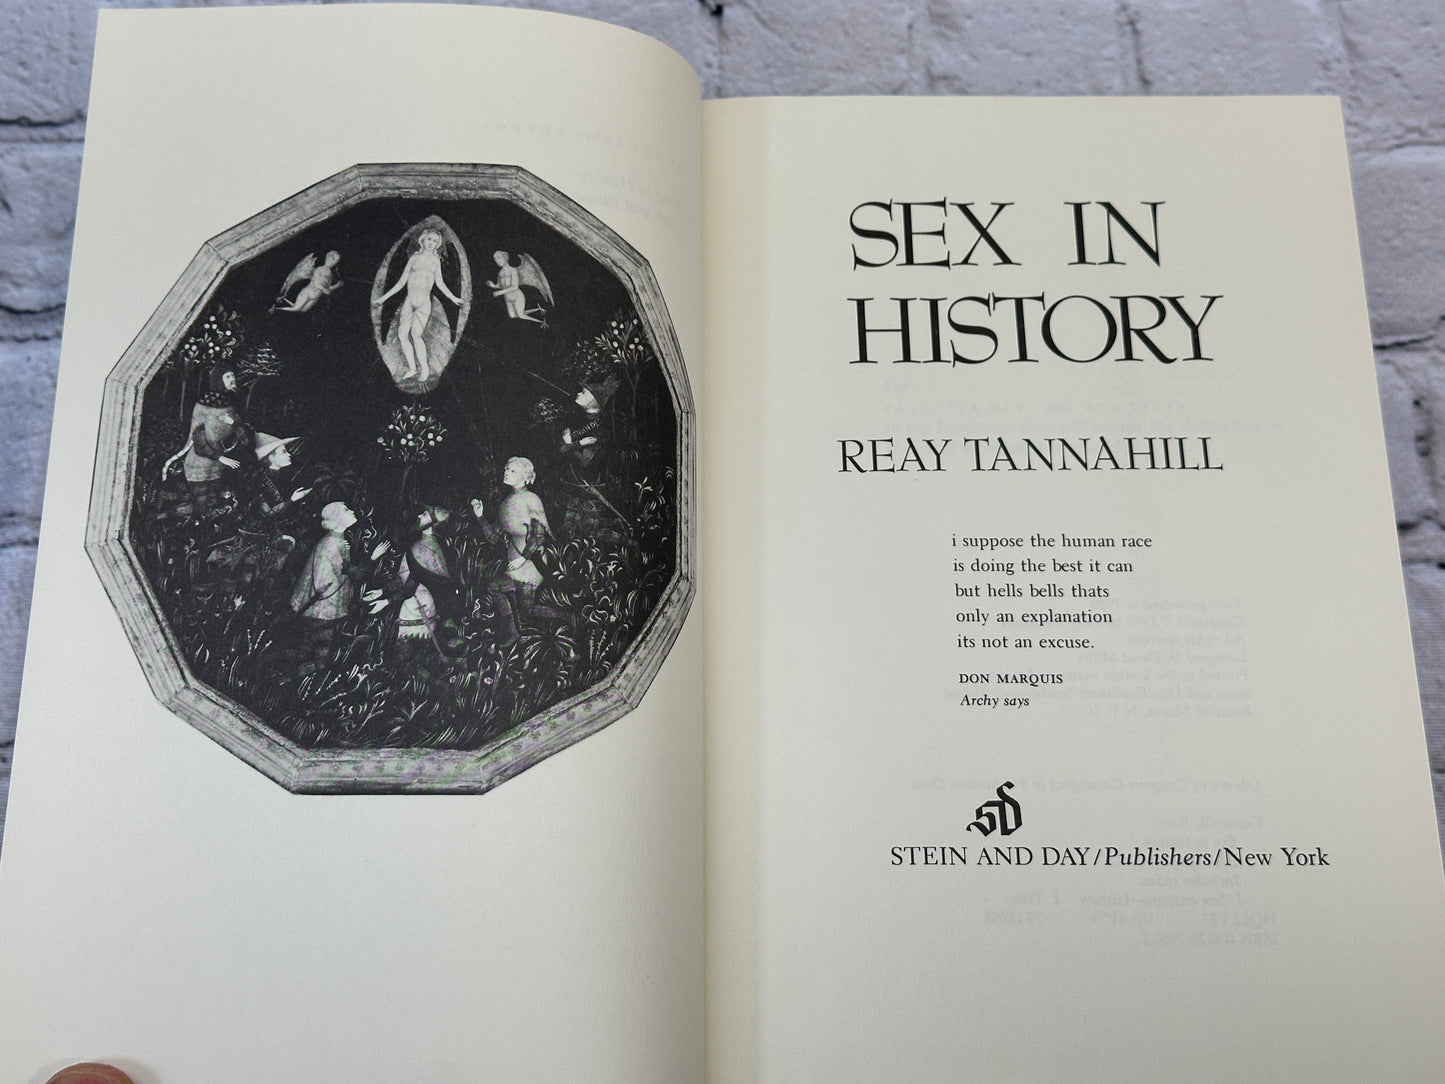 Sex in History by Reay Tannahill [1980]